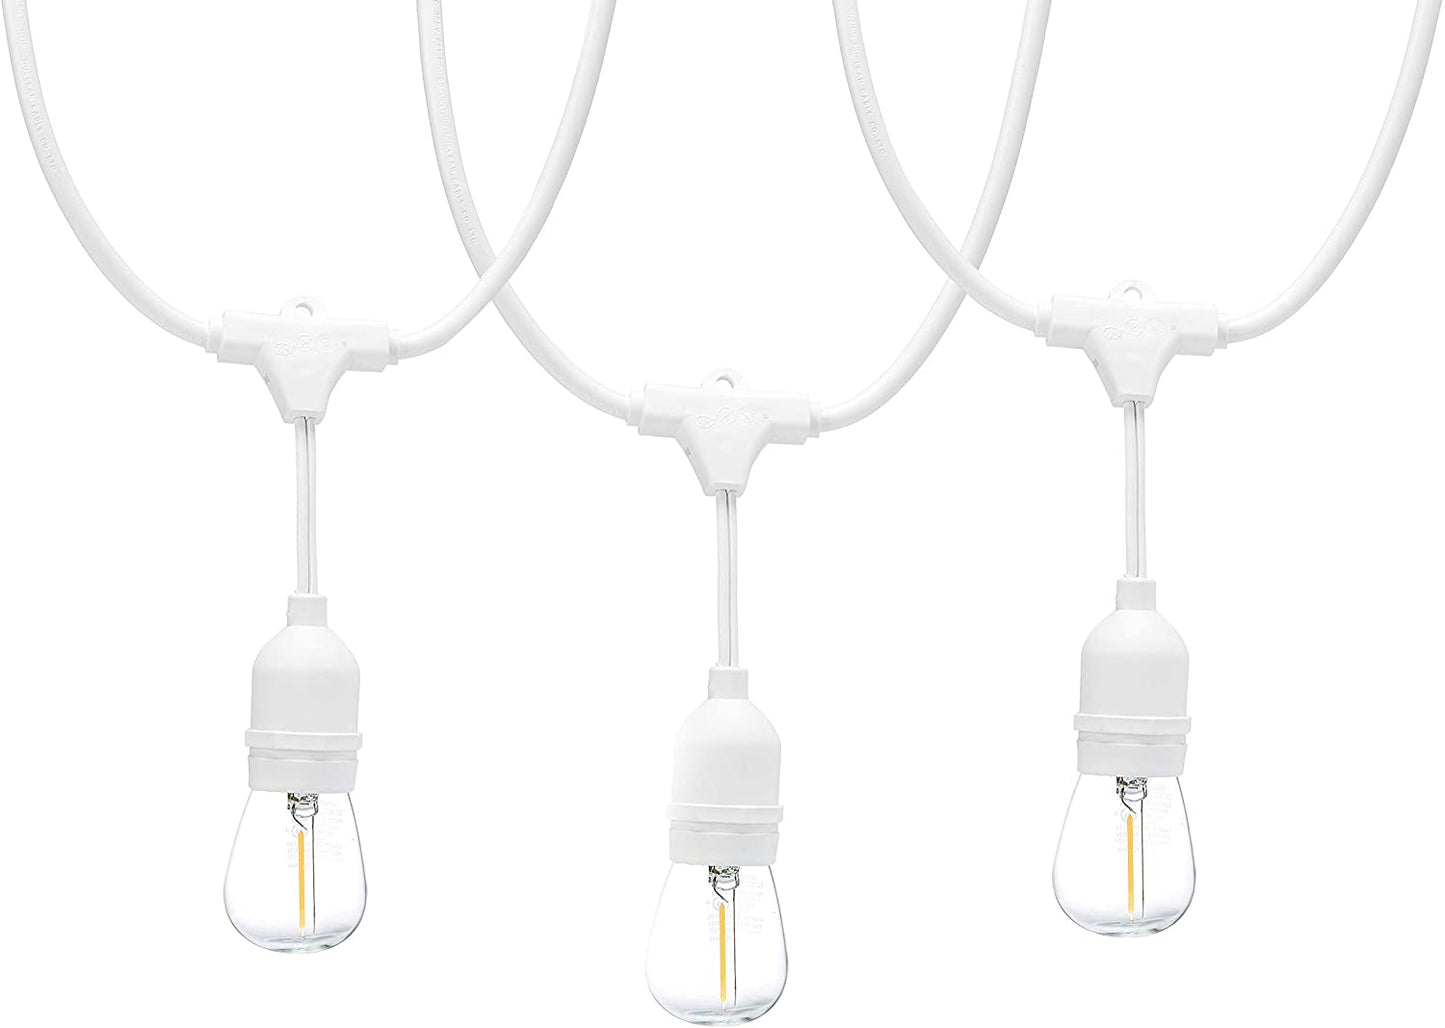 Basics 48-Foot LED Commercial Grade Outdoor String Lights with 16 Edison Style S14 LED Soft White Bulbs - White Cord